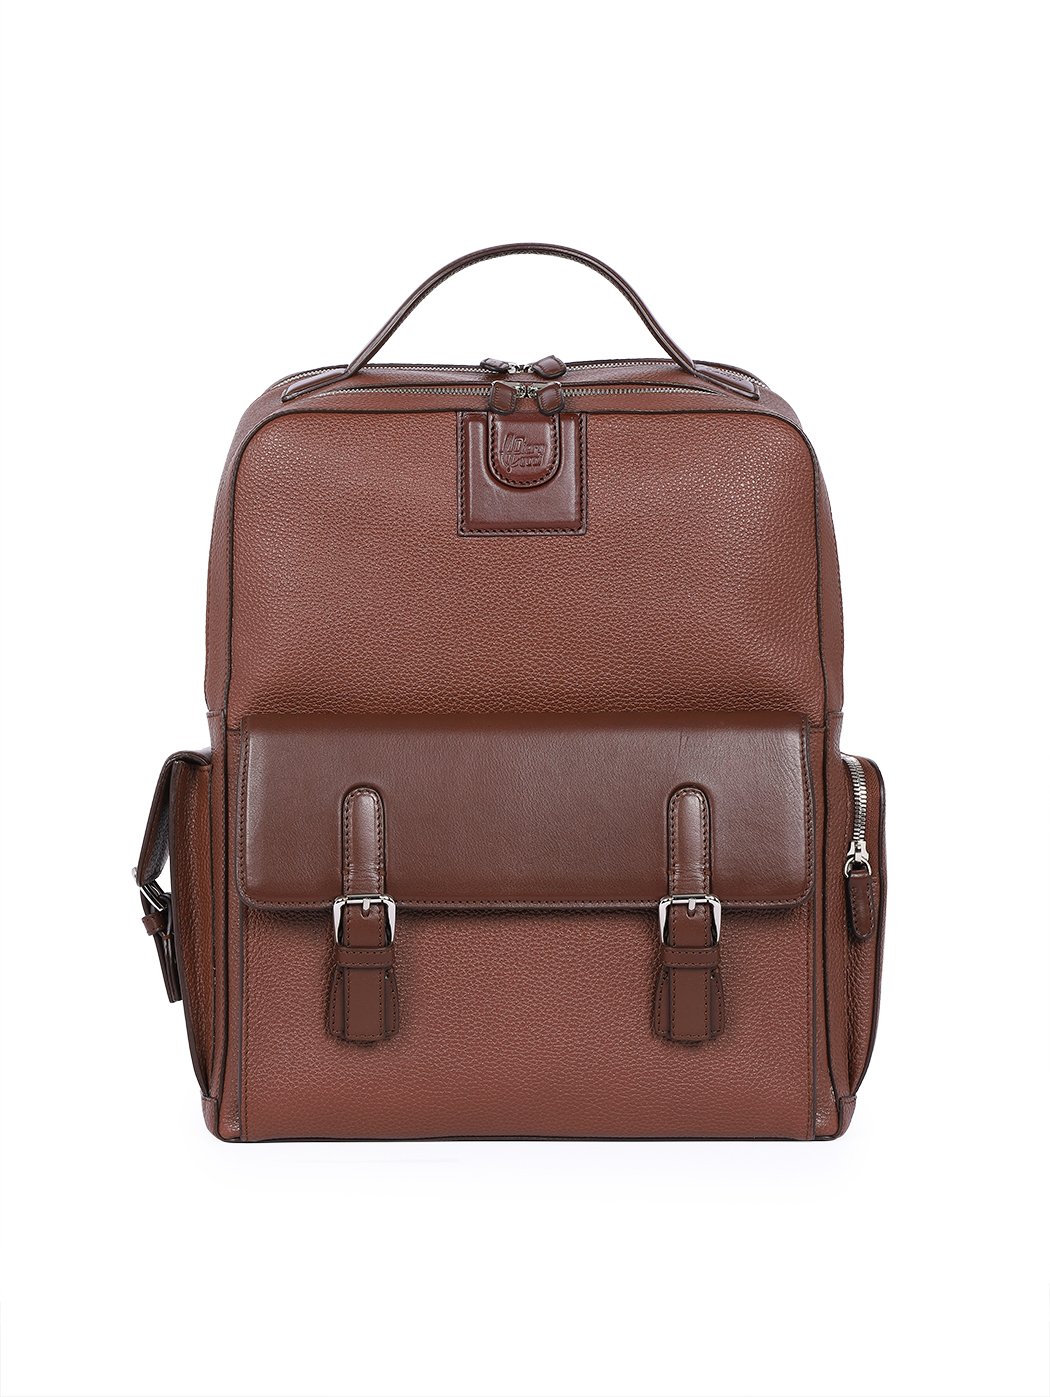 Professional Backpack Computer Leather Bag Brown